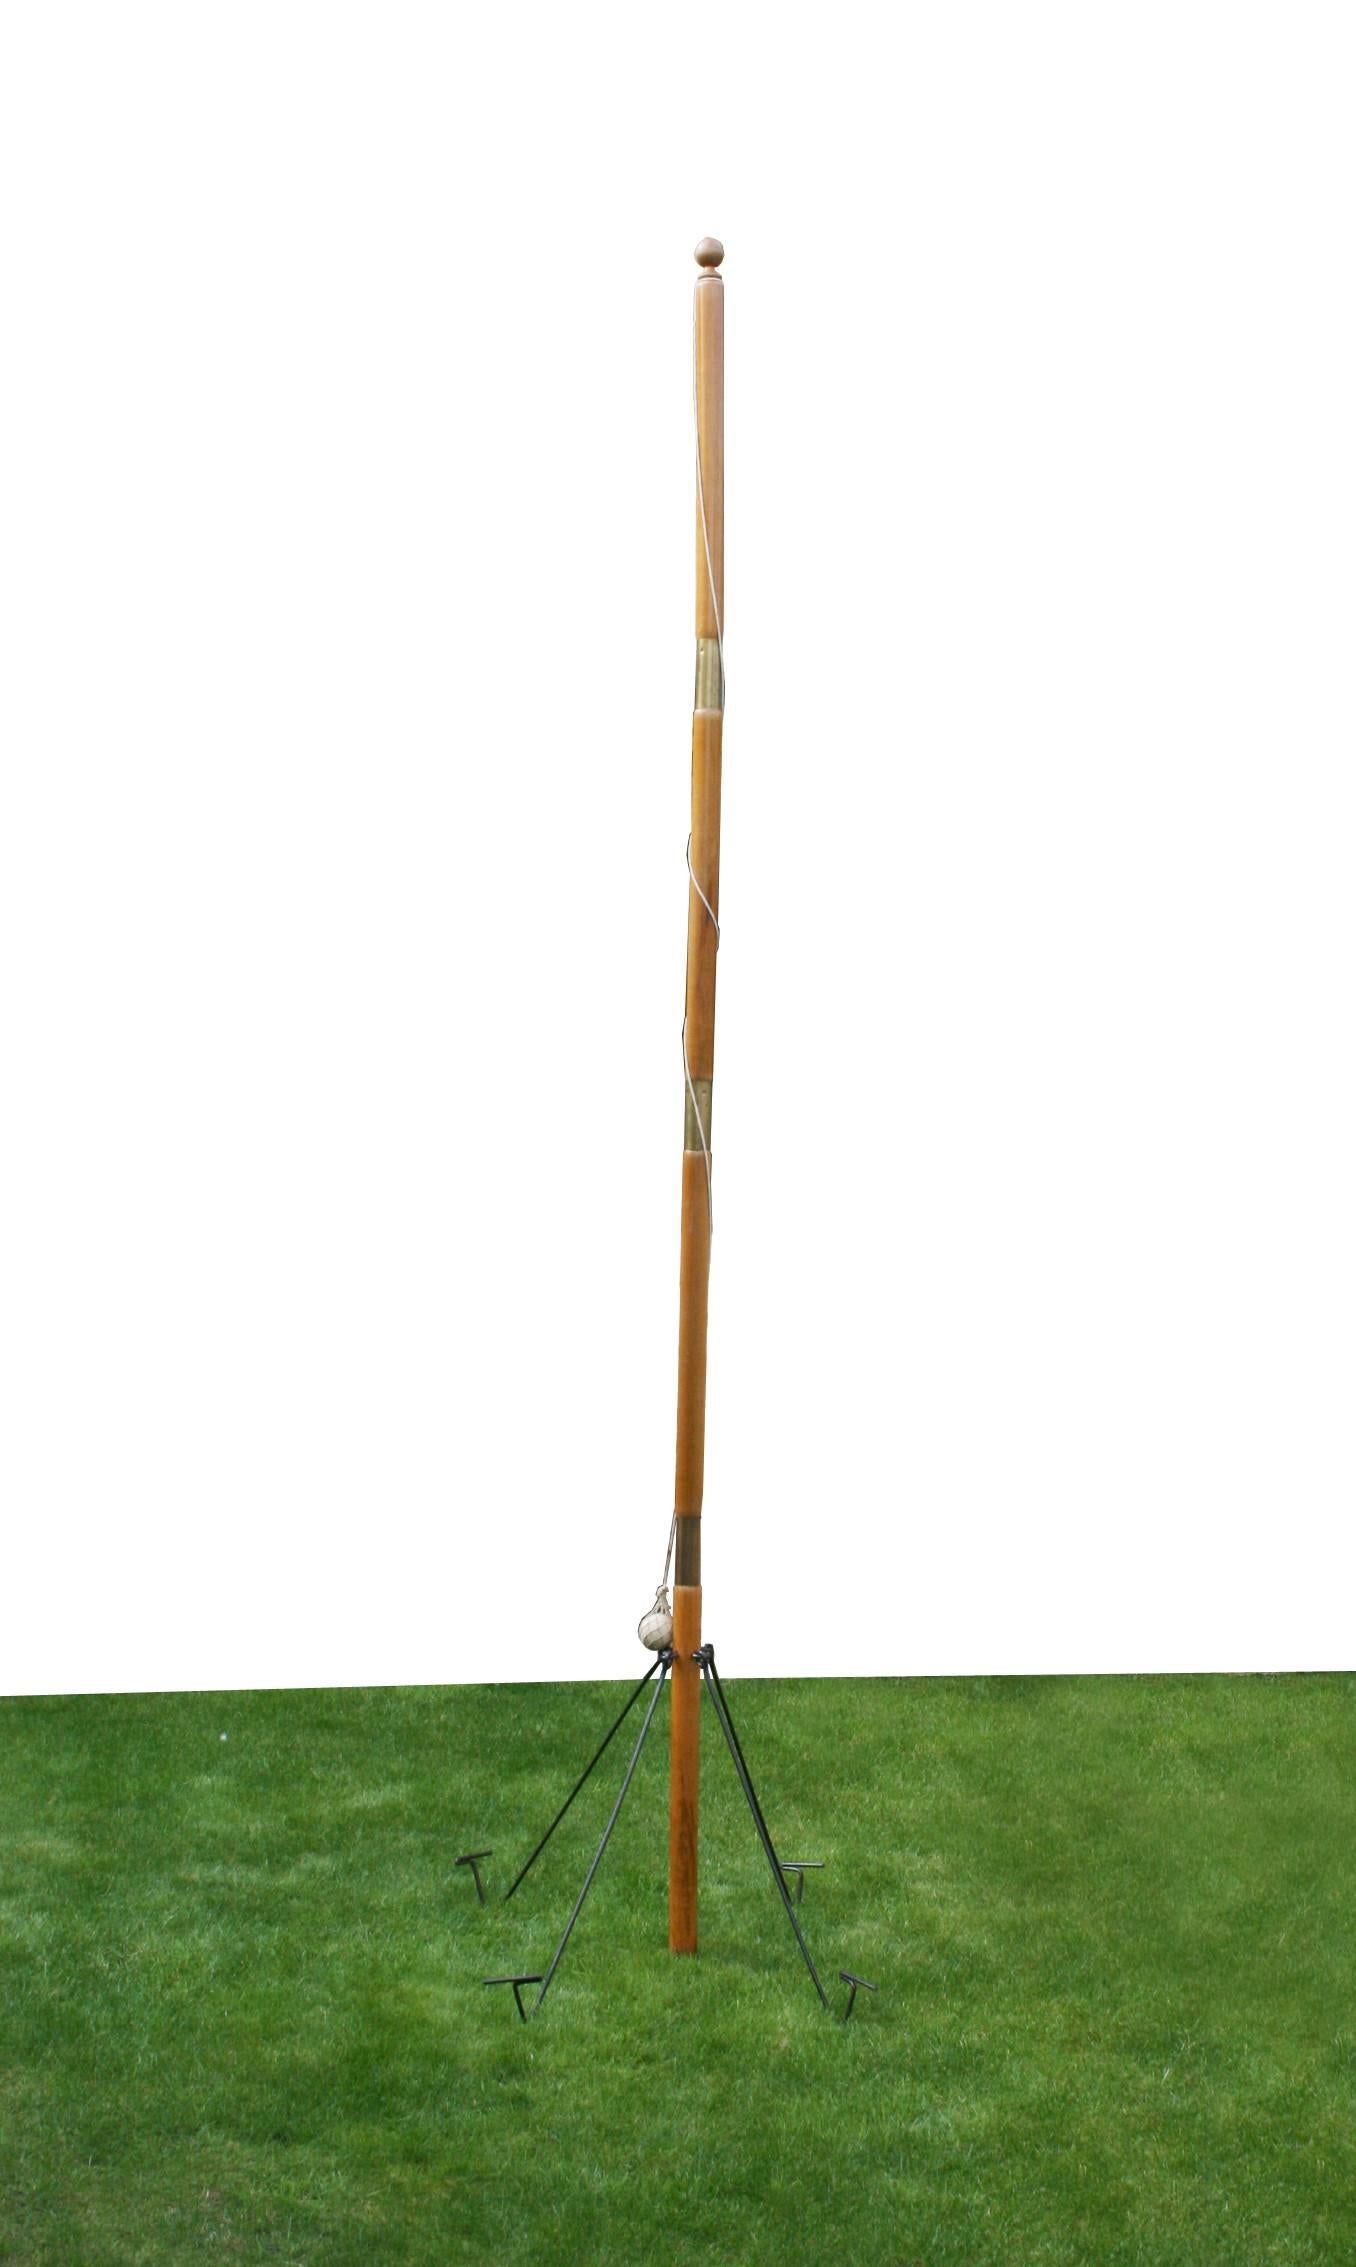 A late Victorian or early Edwardian Tetherball or Swing ball tennis game. The game comprises of a large beechwood pole, metal pegs and ball in original refurbished pine box. The pole is in four sections with metal securing struts for fixing to the